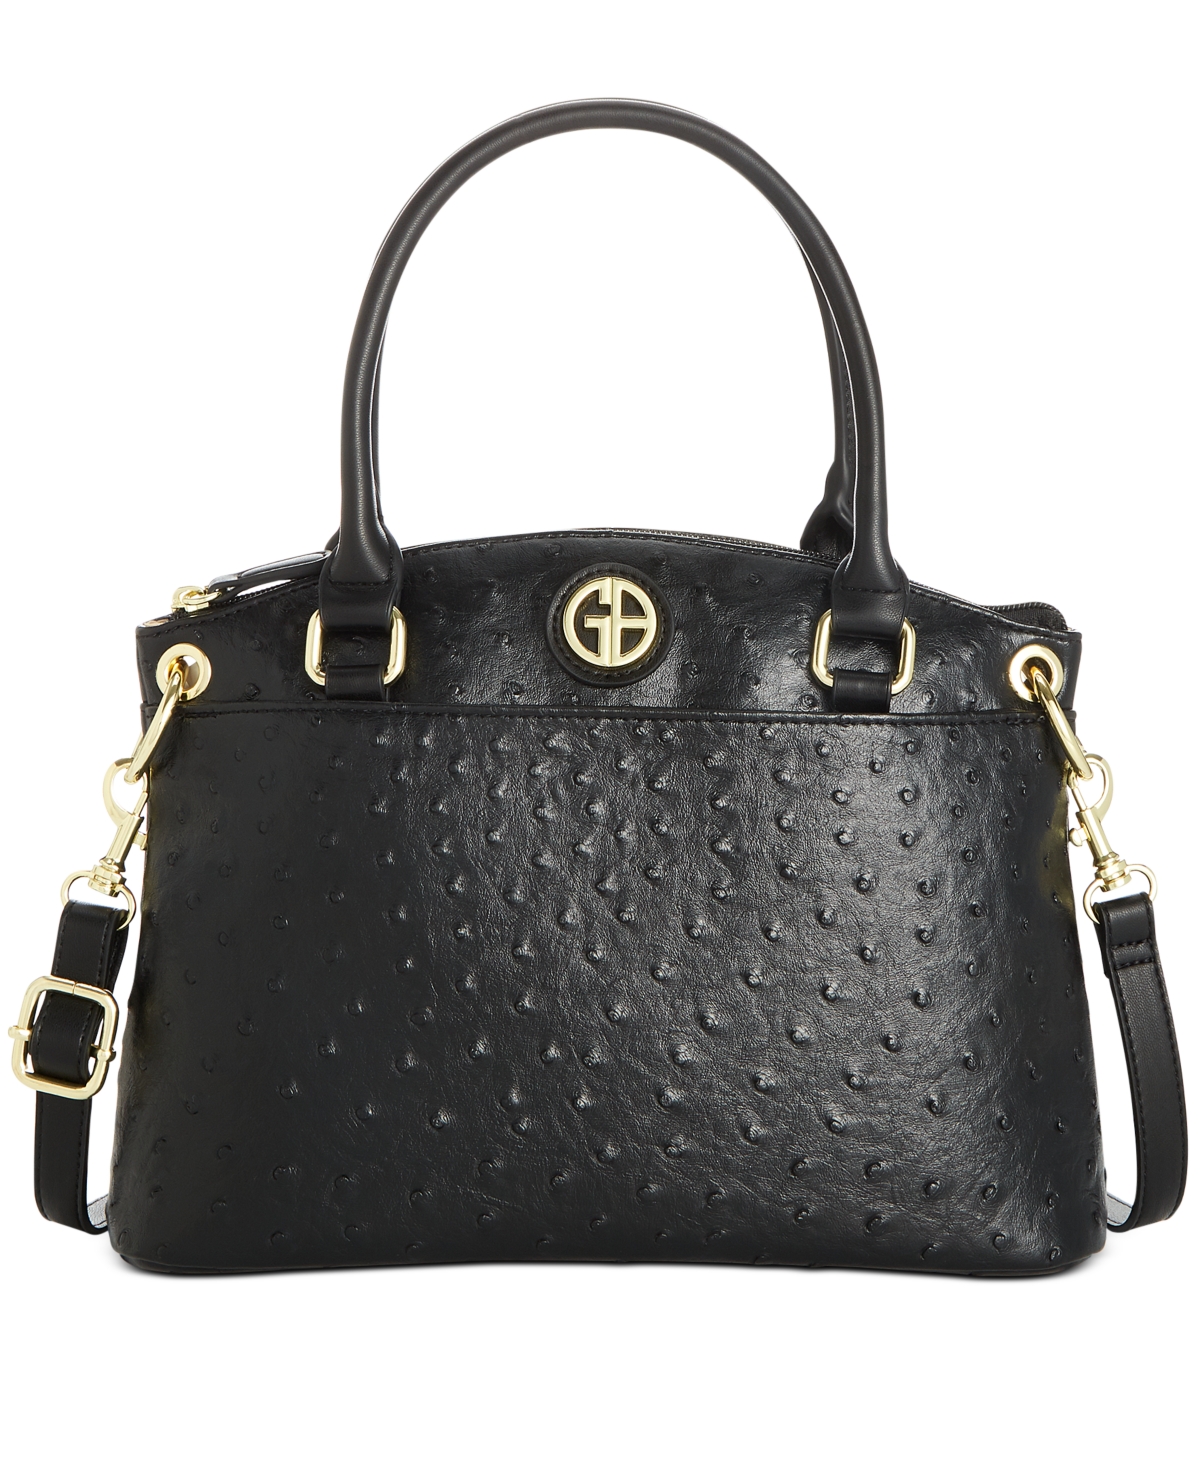 Faux Ostrich Mini Satchel, Created for Macy's - Black/Gold